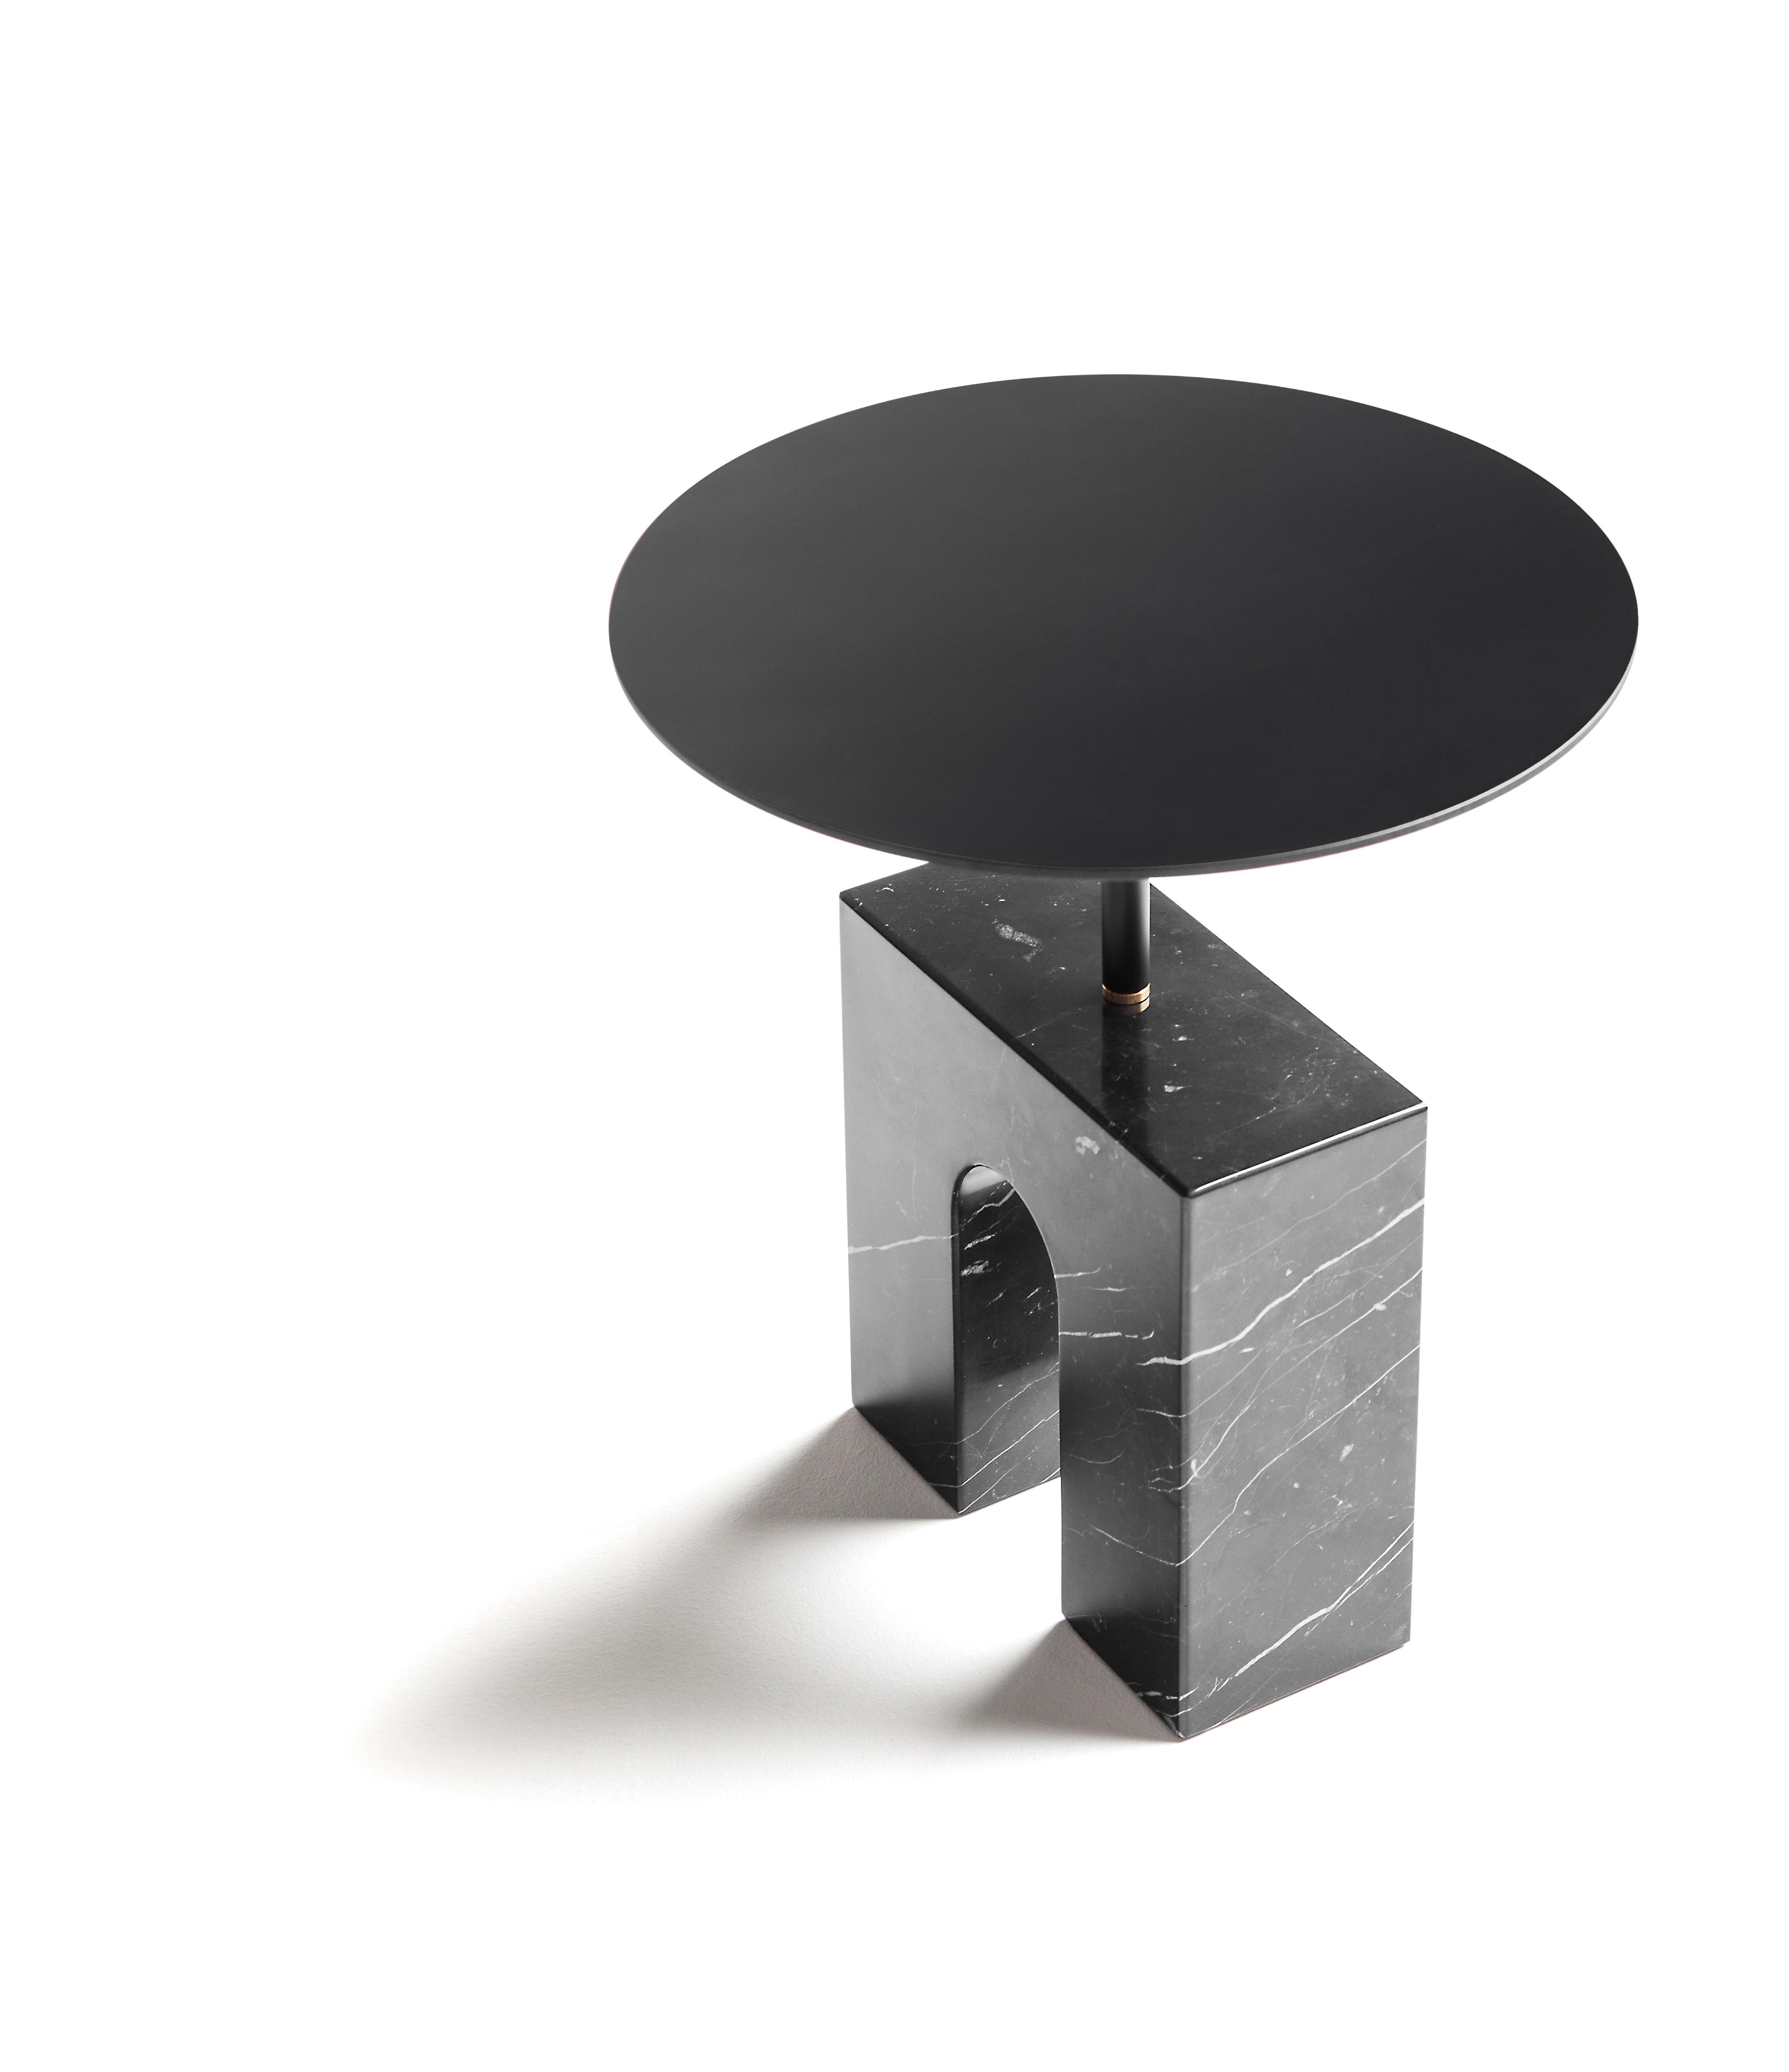 Triumph Marquina marble side table by Joseph Vila Capdevila
Materials: Marquina marble, black lacquered iron, brass
Dimensions: ø 42 x 46.5 cm
Weight: 27 kg

Luxurious mirror in two separated parts: the base, made with premium Carrara marble,